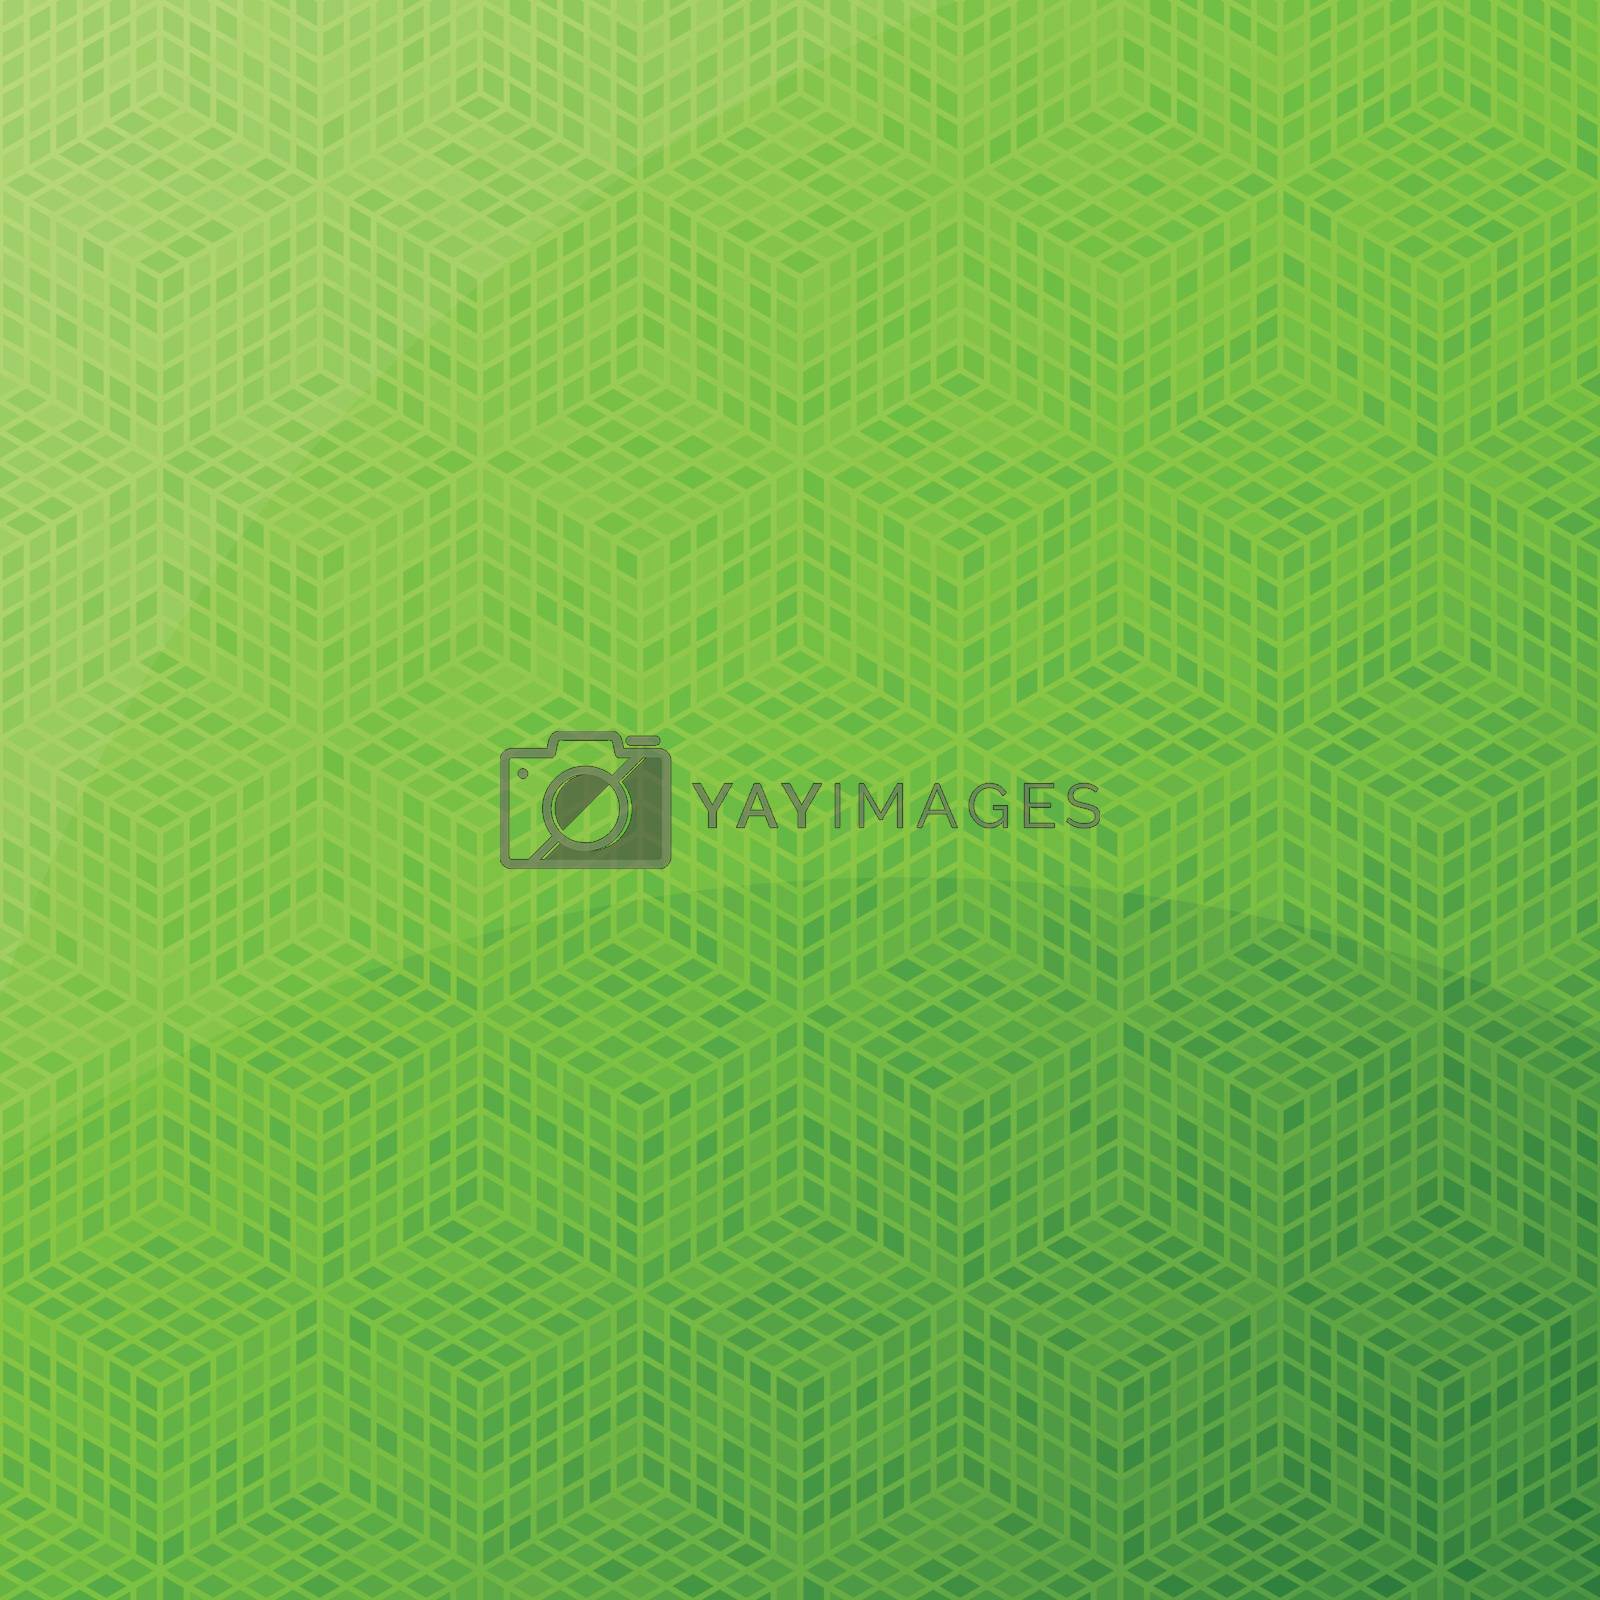 Royalty free image of Isometric background pattern by ggebl